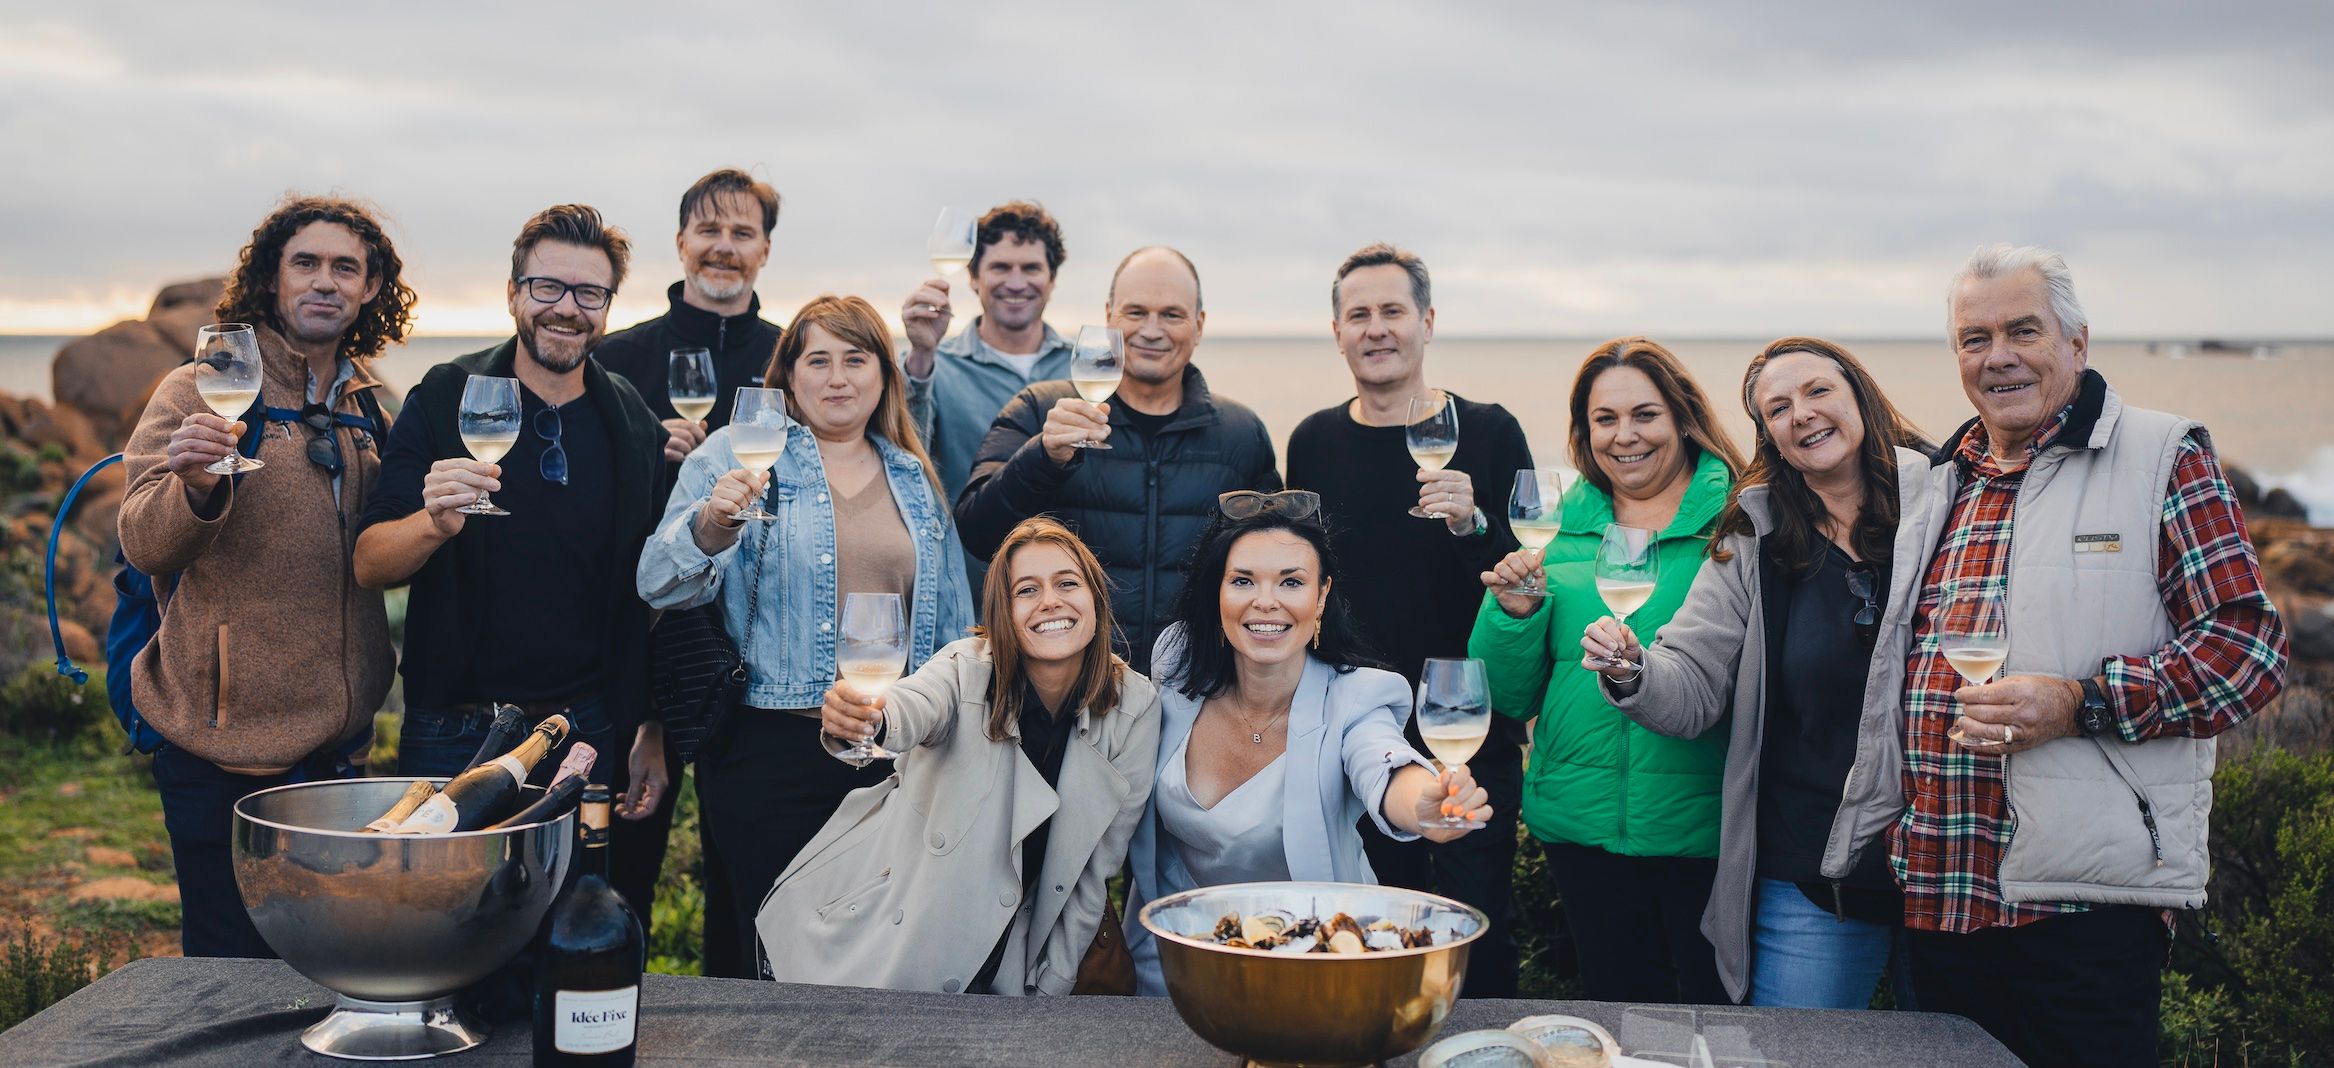 IWSC On The Road: Medals galore for Margaret River producers